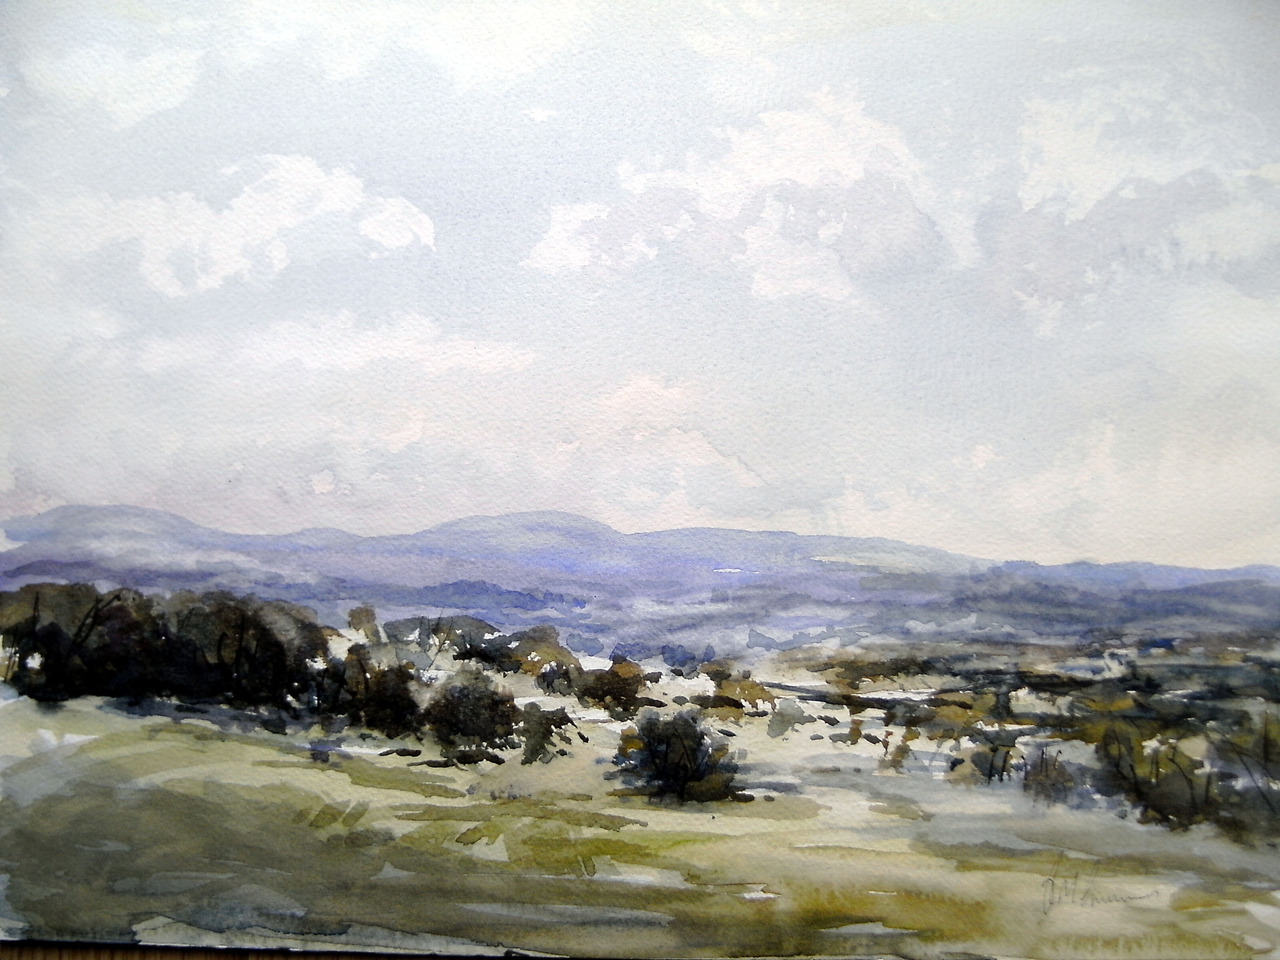 ‘Rough Brush’ watercolor near Cartmel fell in the Lake District.